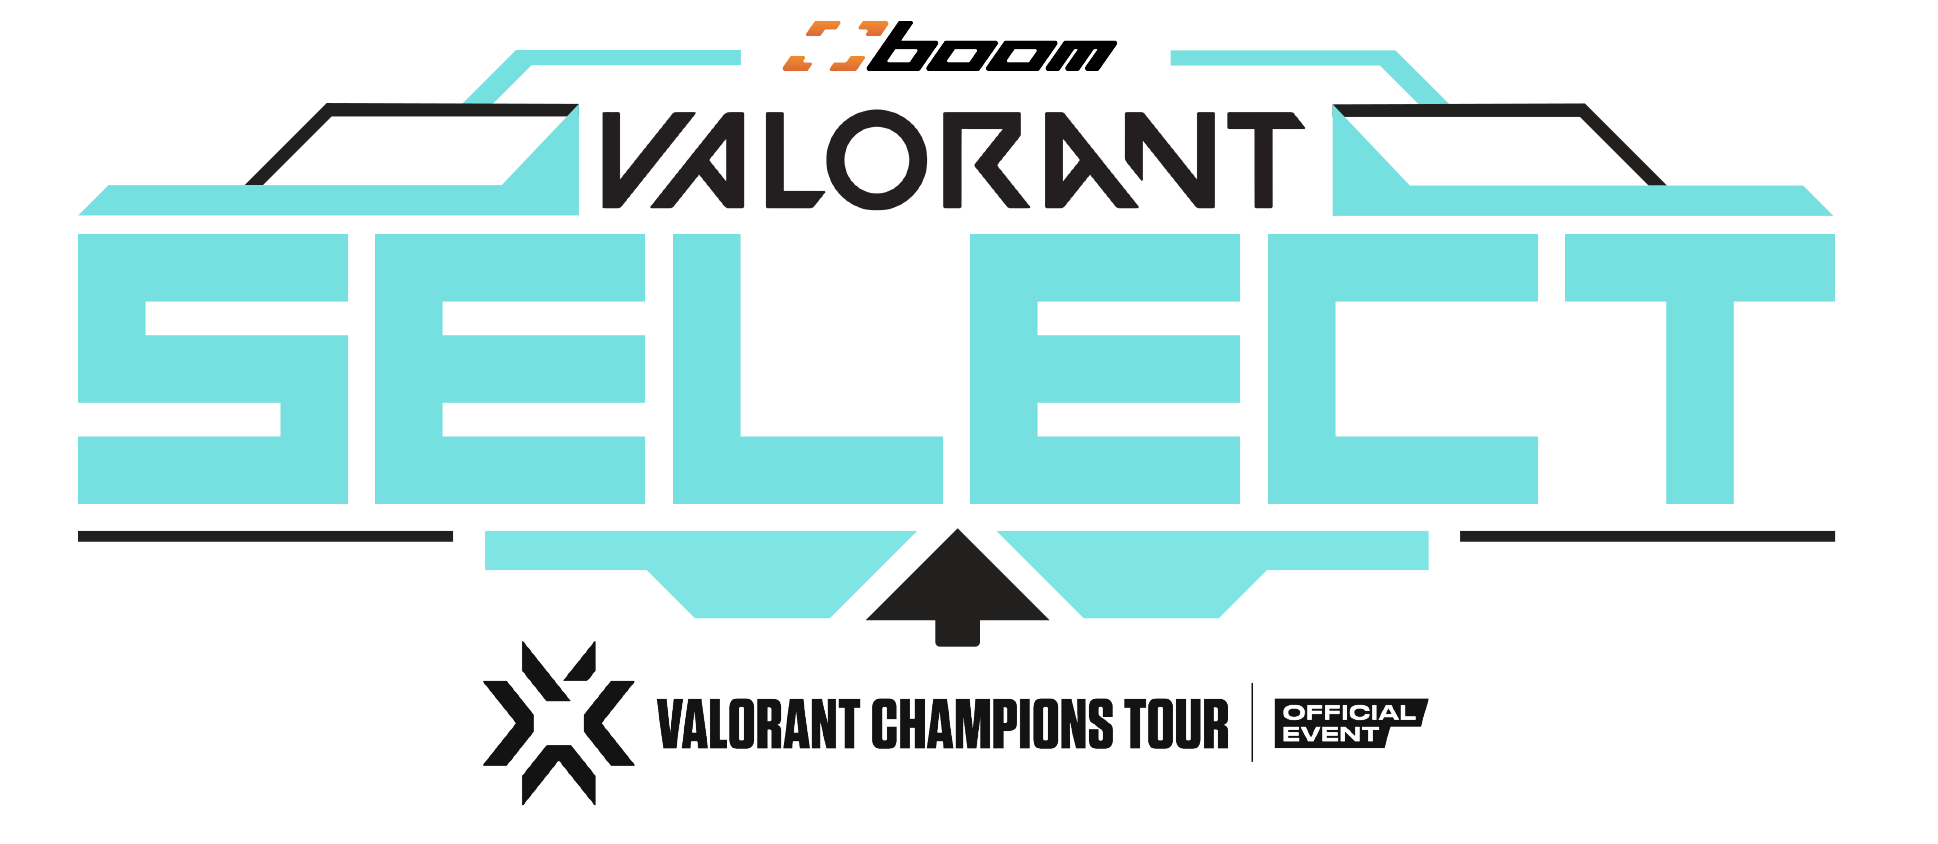 VALORANT Champions Tour on X: Here are your official